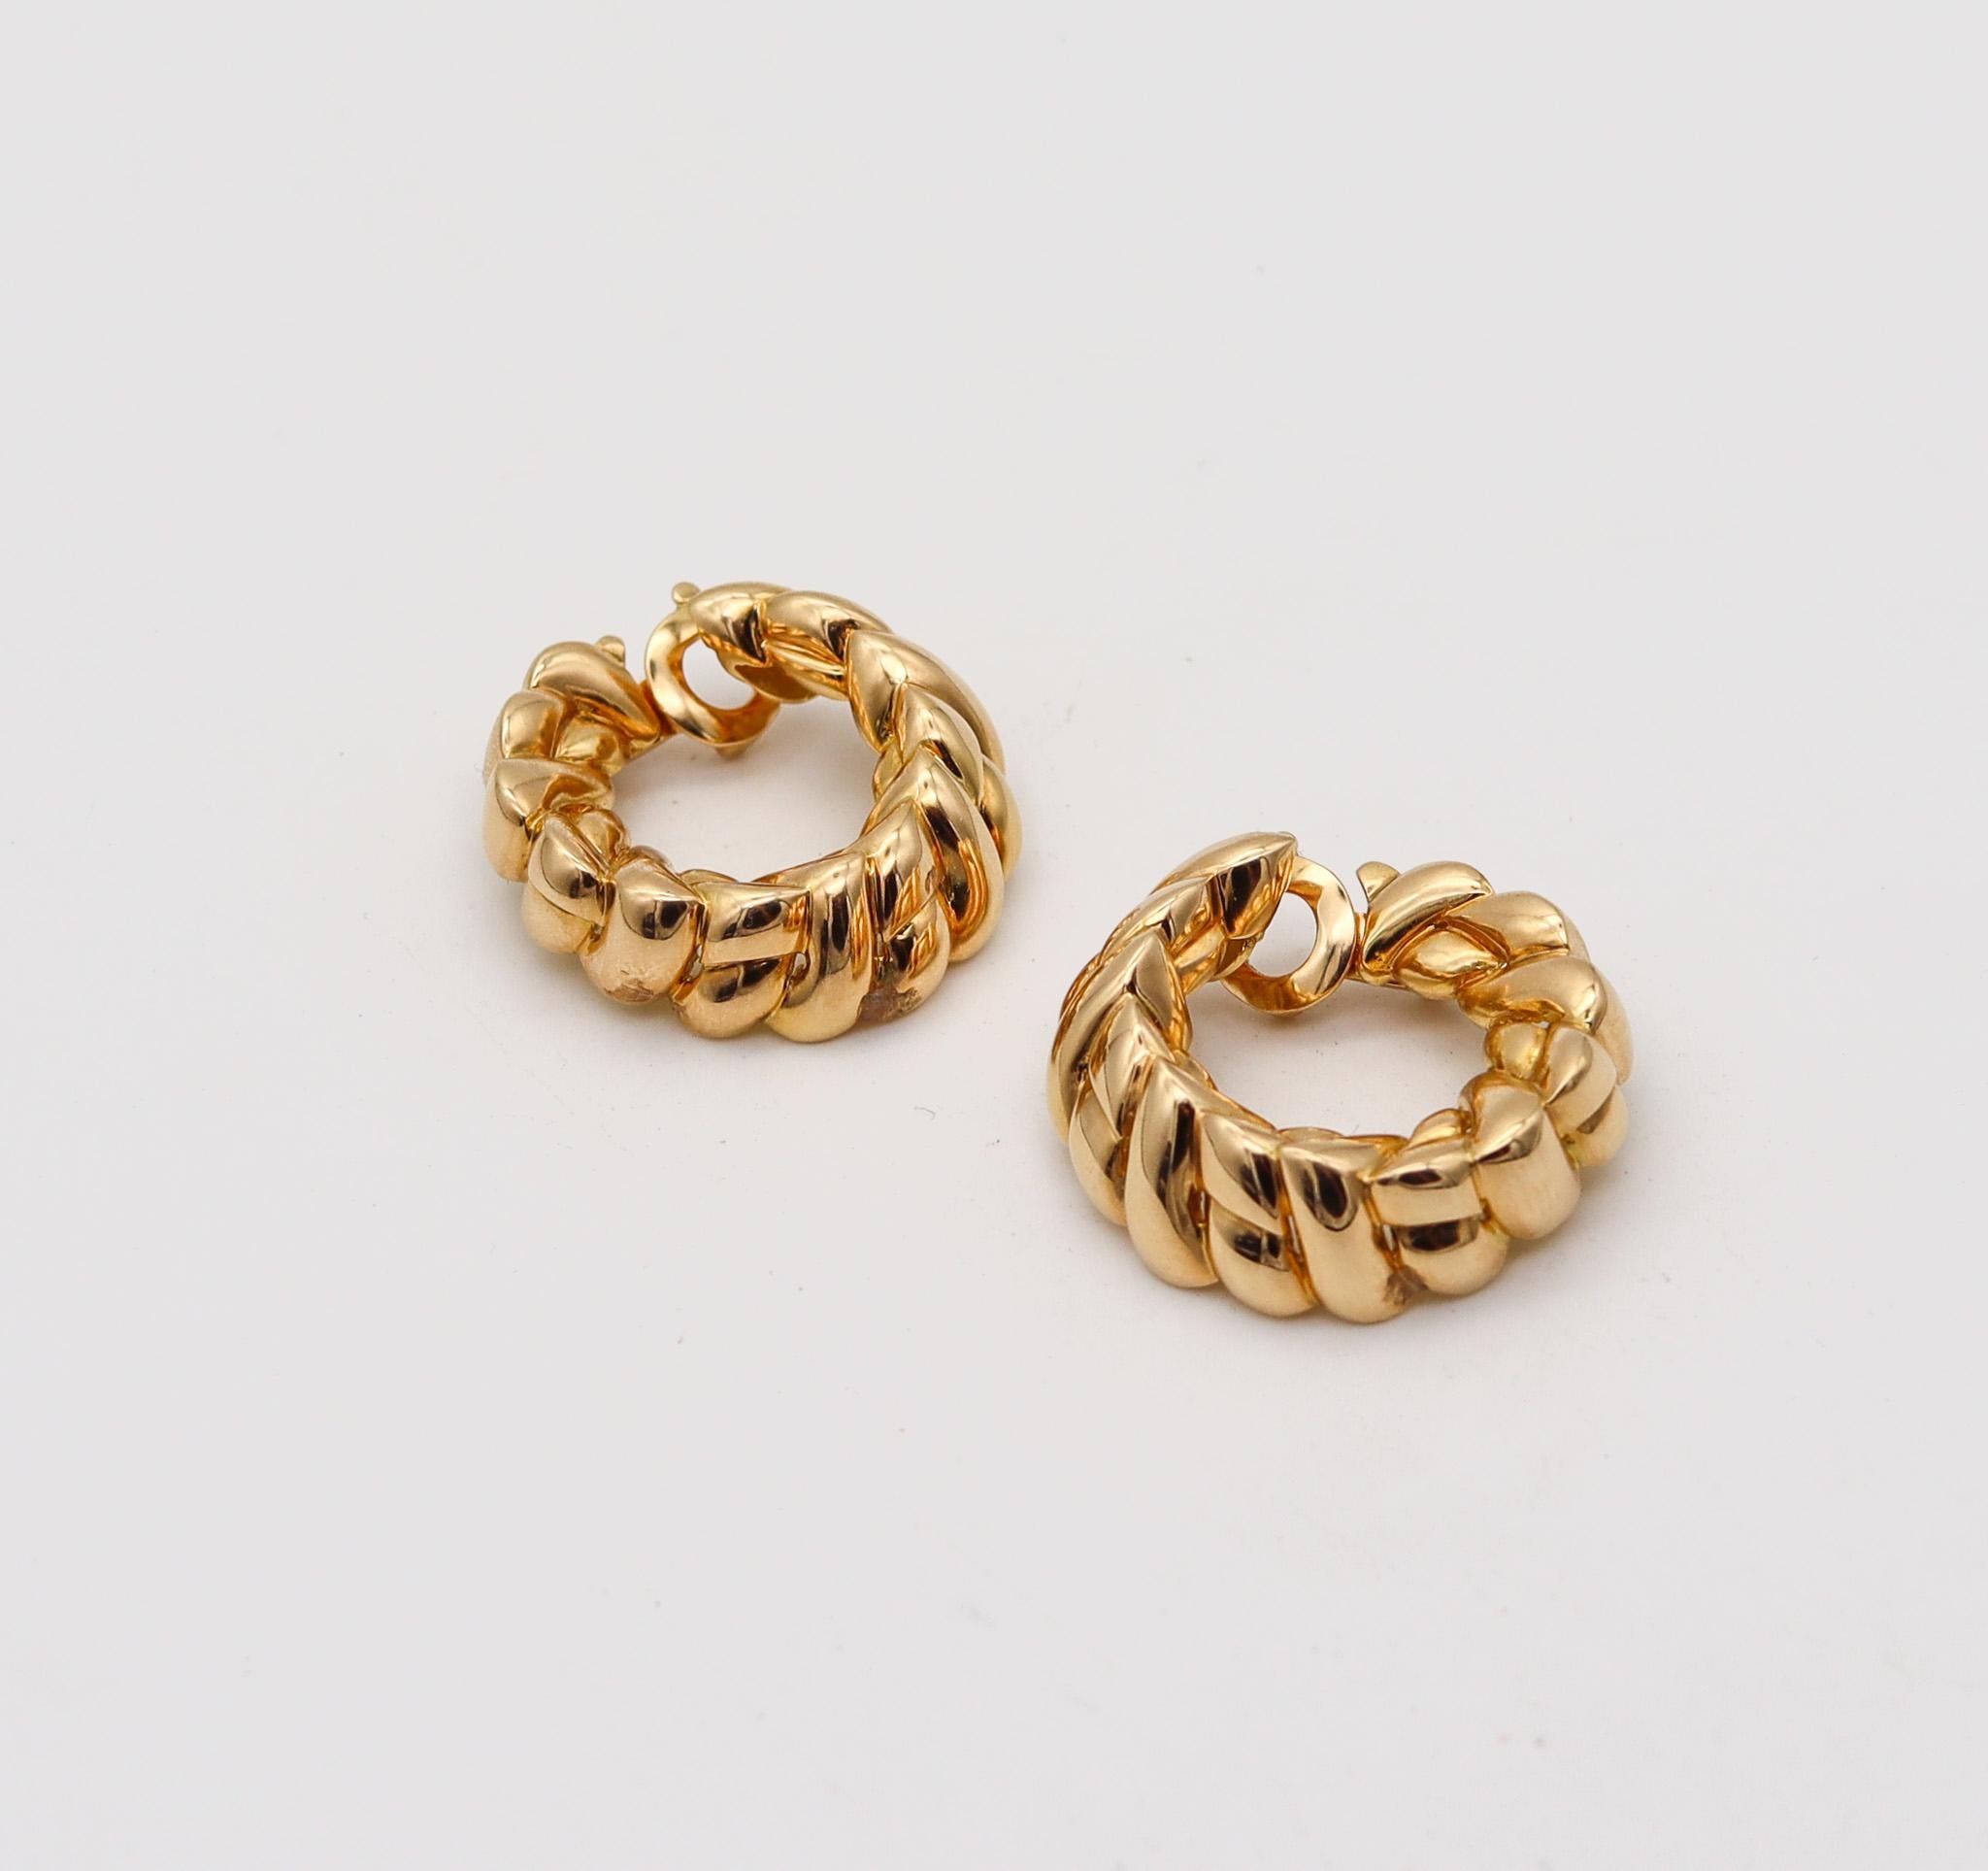 Hoops earrings designed by Van Cleef & Arpels.

Fabulous statements pair of hoops-earrings, created in Paris France by the jewelry house of Van Cleef & Arpels, back in the 1970's. This pair has been crafted as a left and right in solid yellow gold